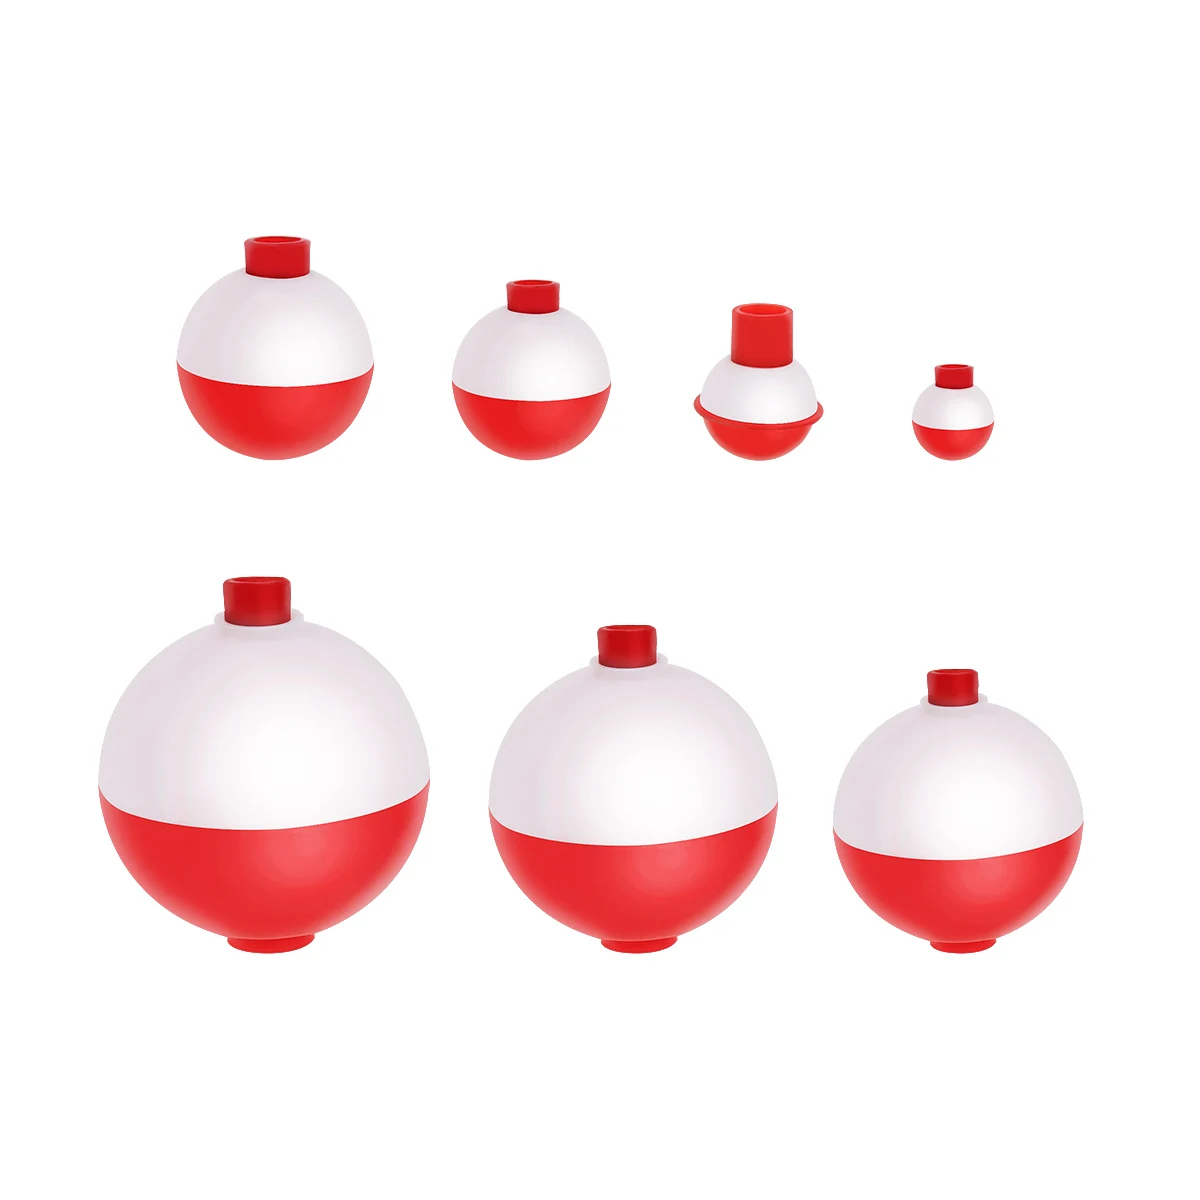 7pcs/set Fishing Bobber Floats Set Hard ABS Snap on Red White Push Button  Round Buoy Size 13-50mm / 0.5-2inch - AliExpress